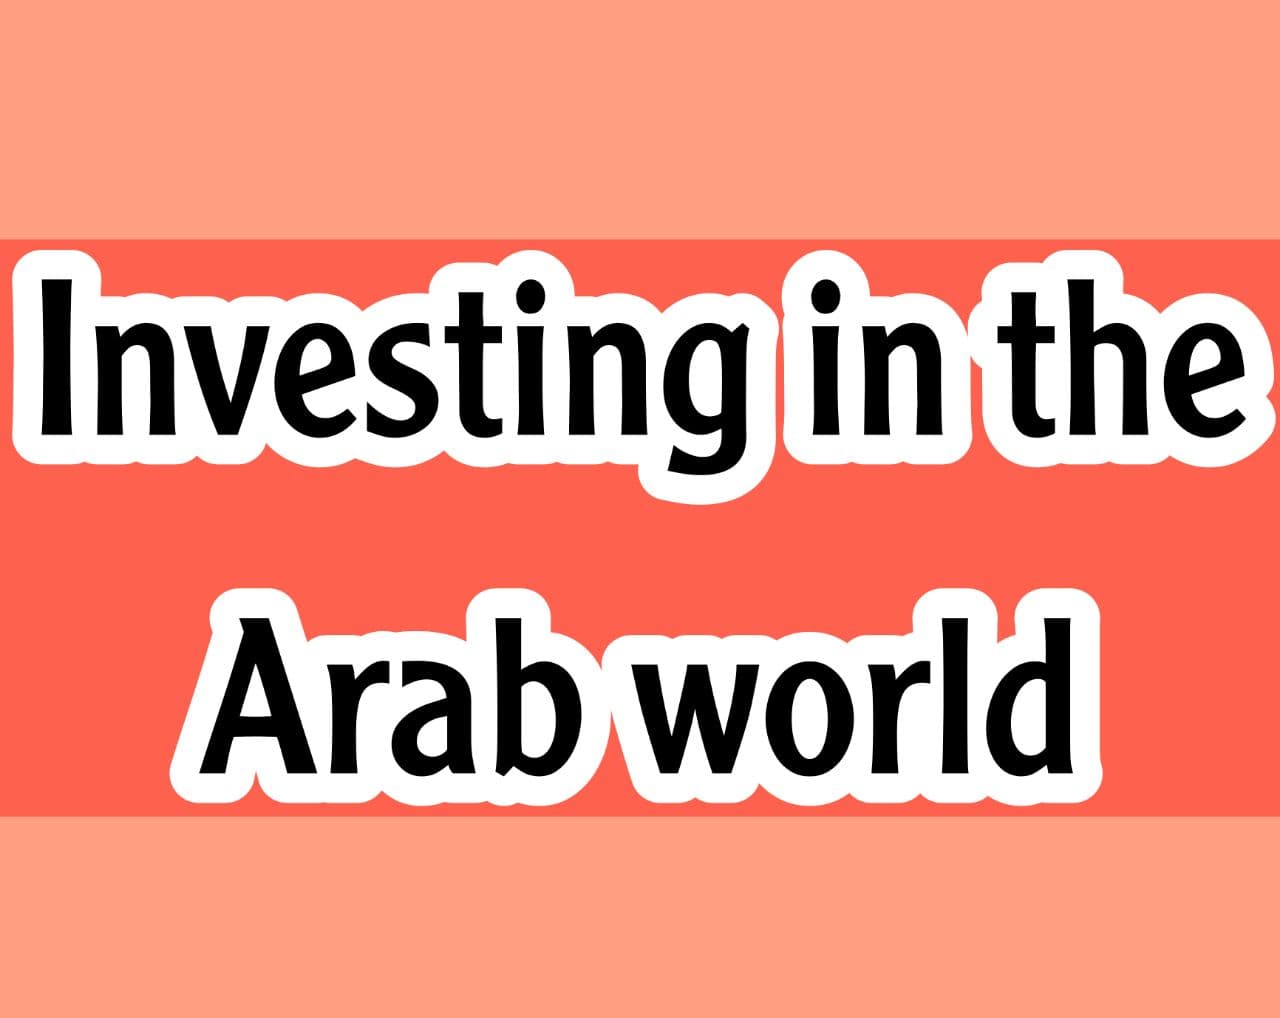 Investing in the Arab world